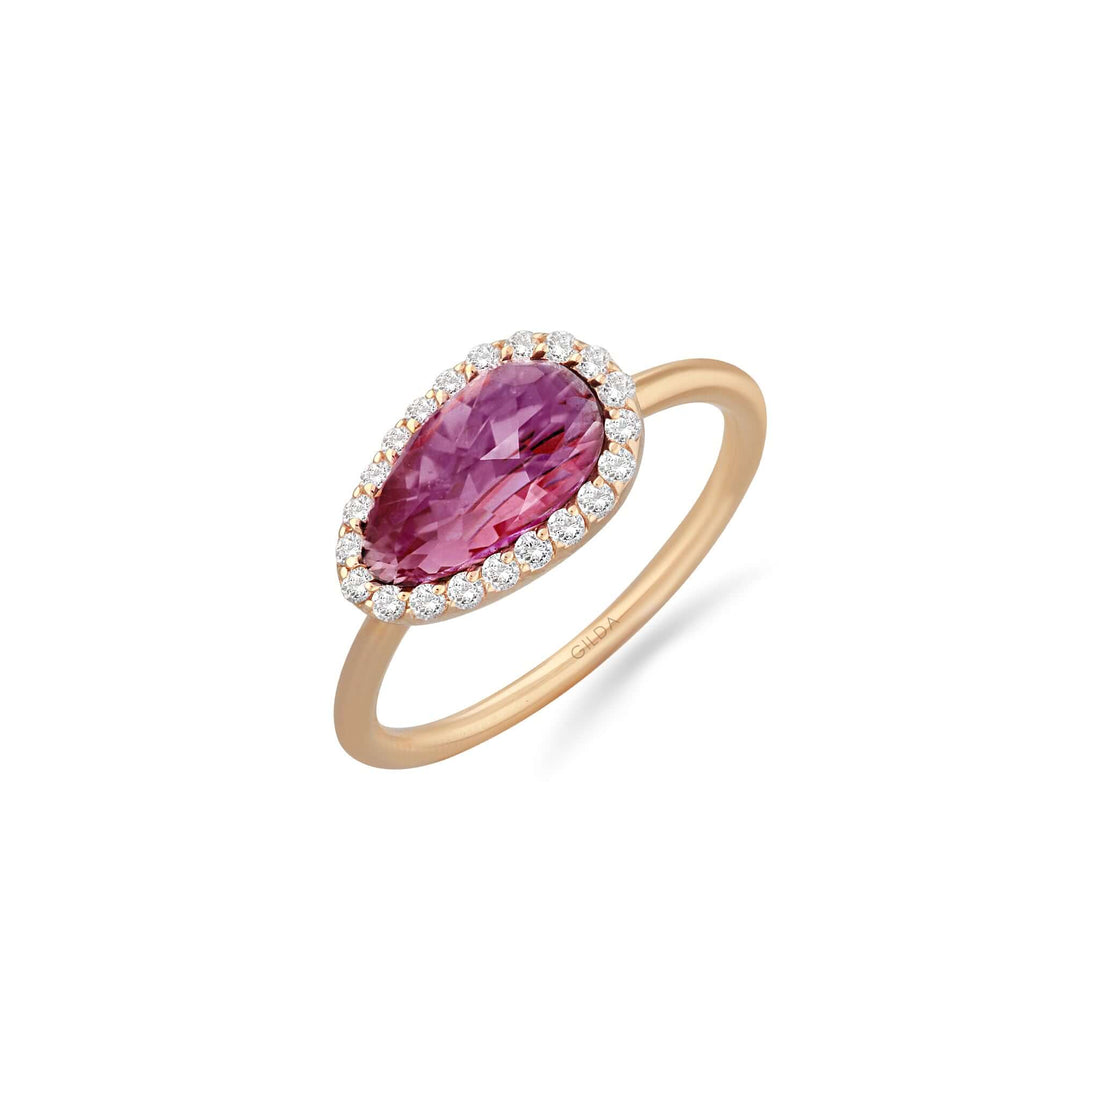 Jewelry Violet | Diamond Ring | 0.23 Cts. | 18K Gold - ring Zengoda Shop online from Artisan Brands